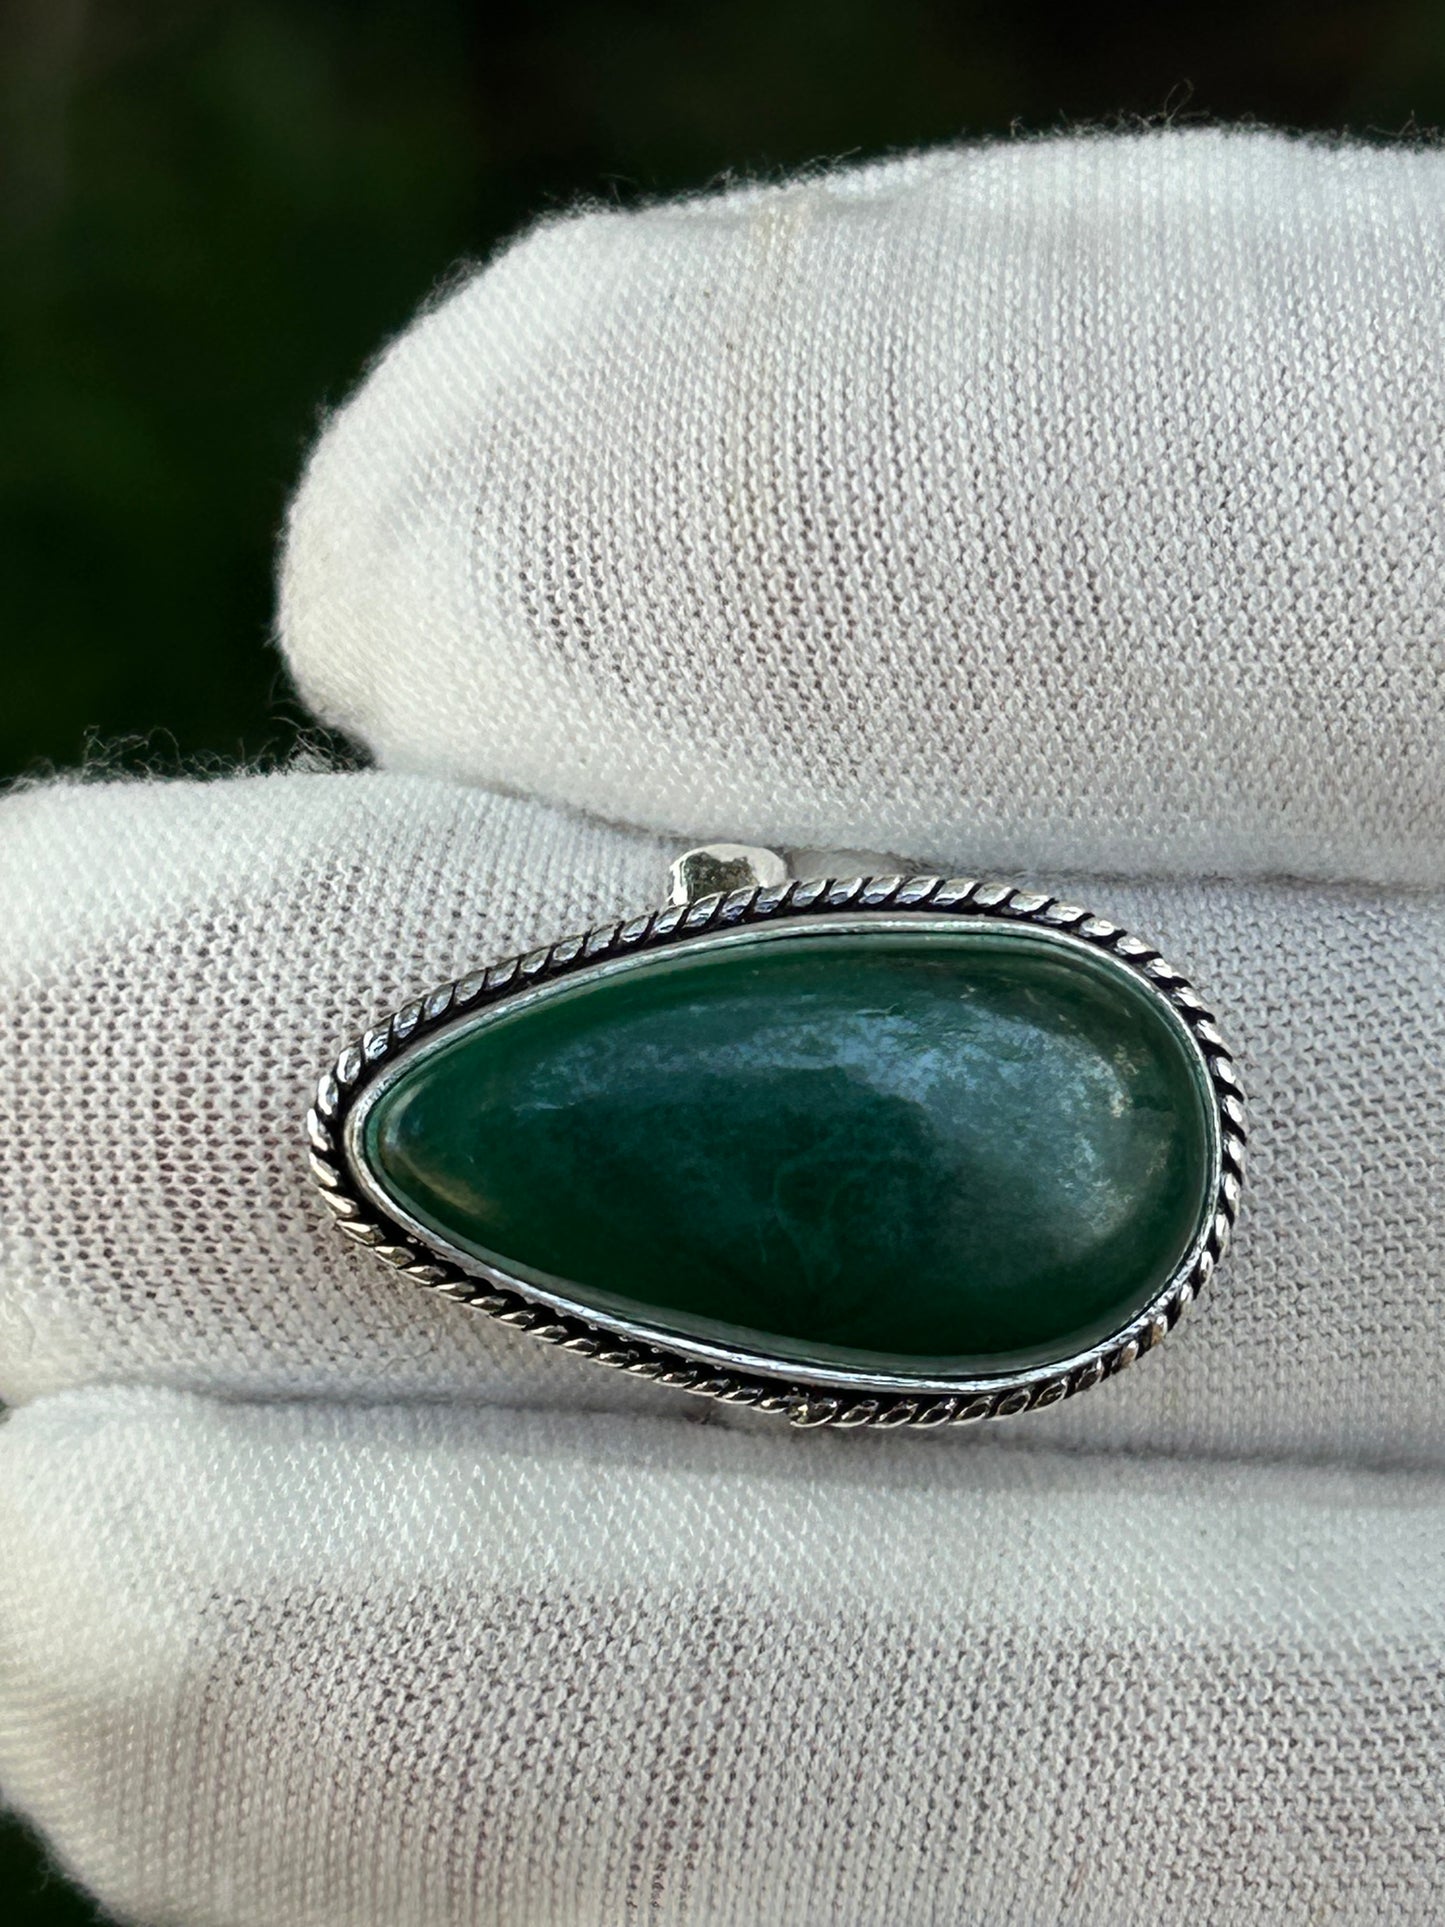 Malachite polished stone set in antique 925 sterling silver adjustable ring setting